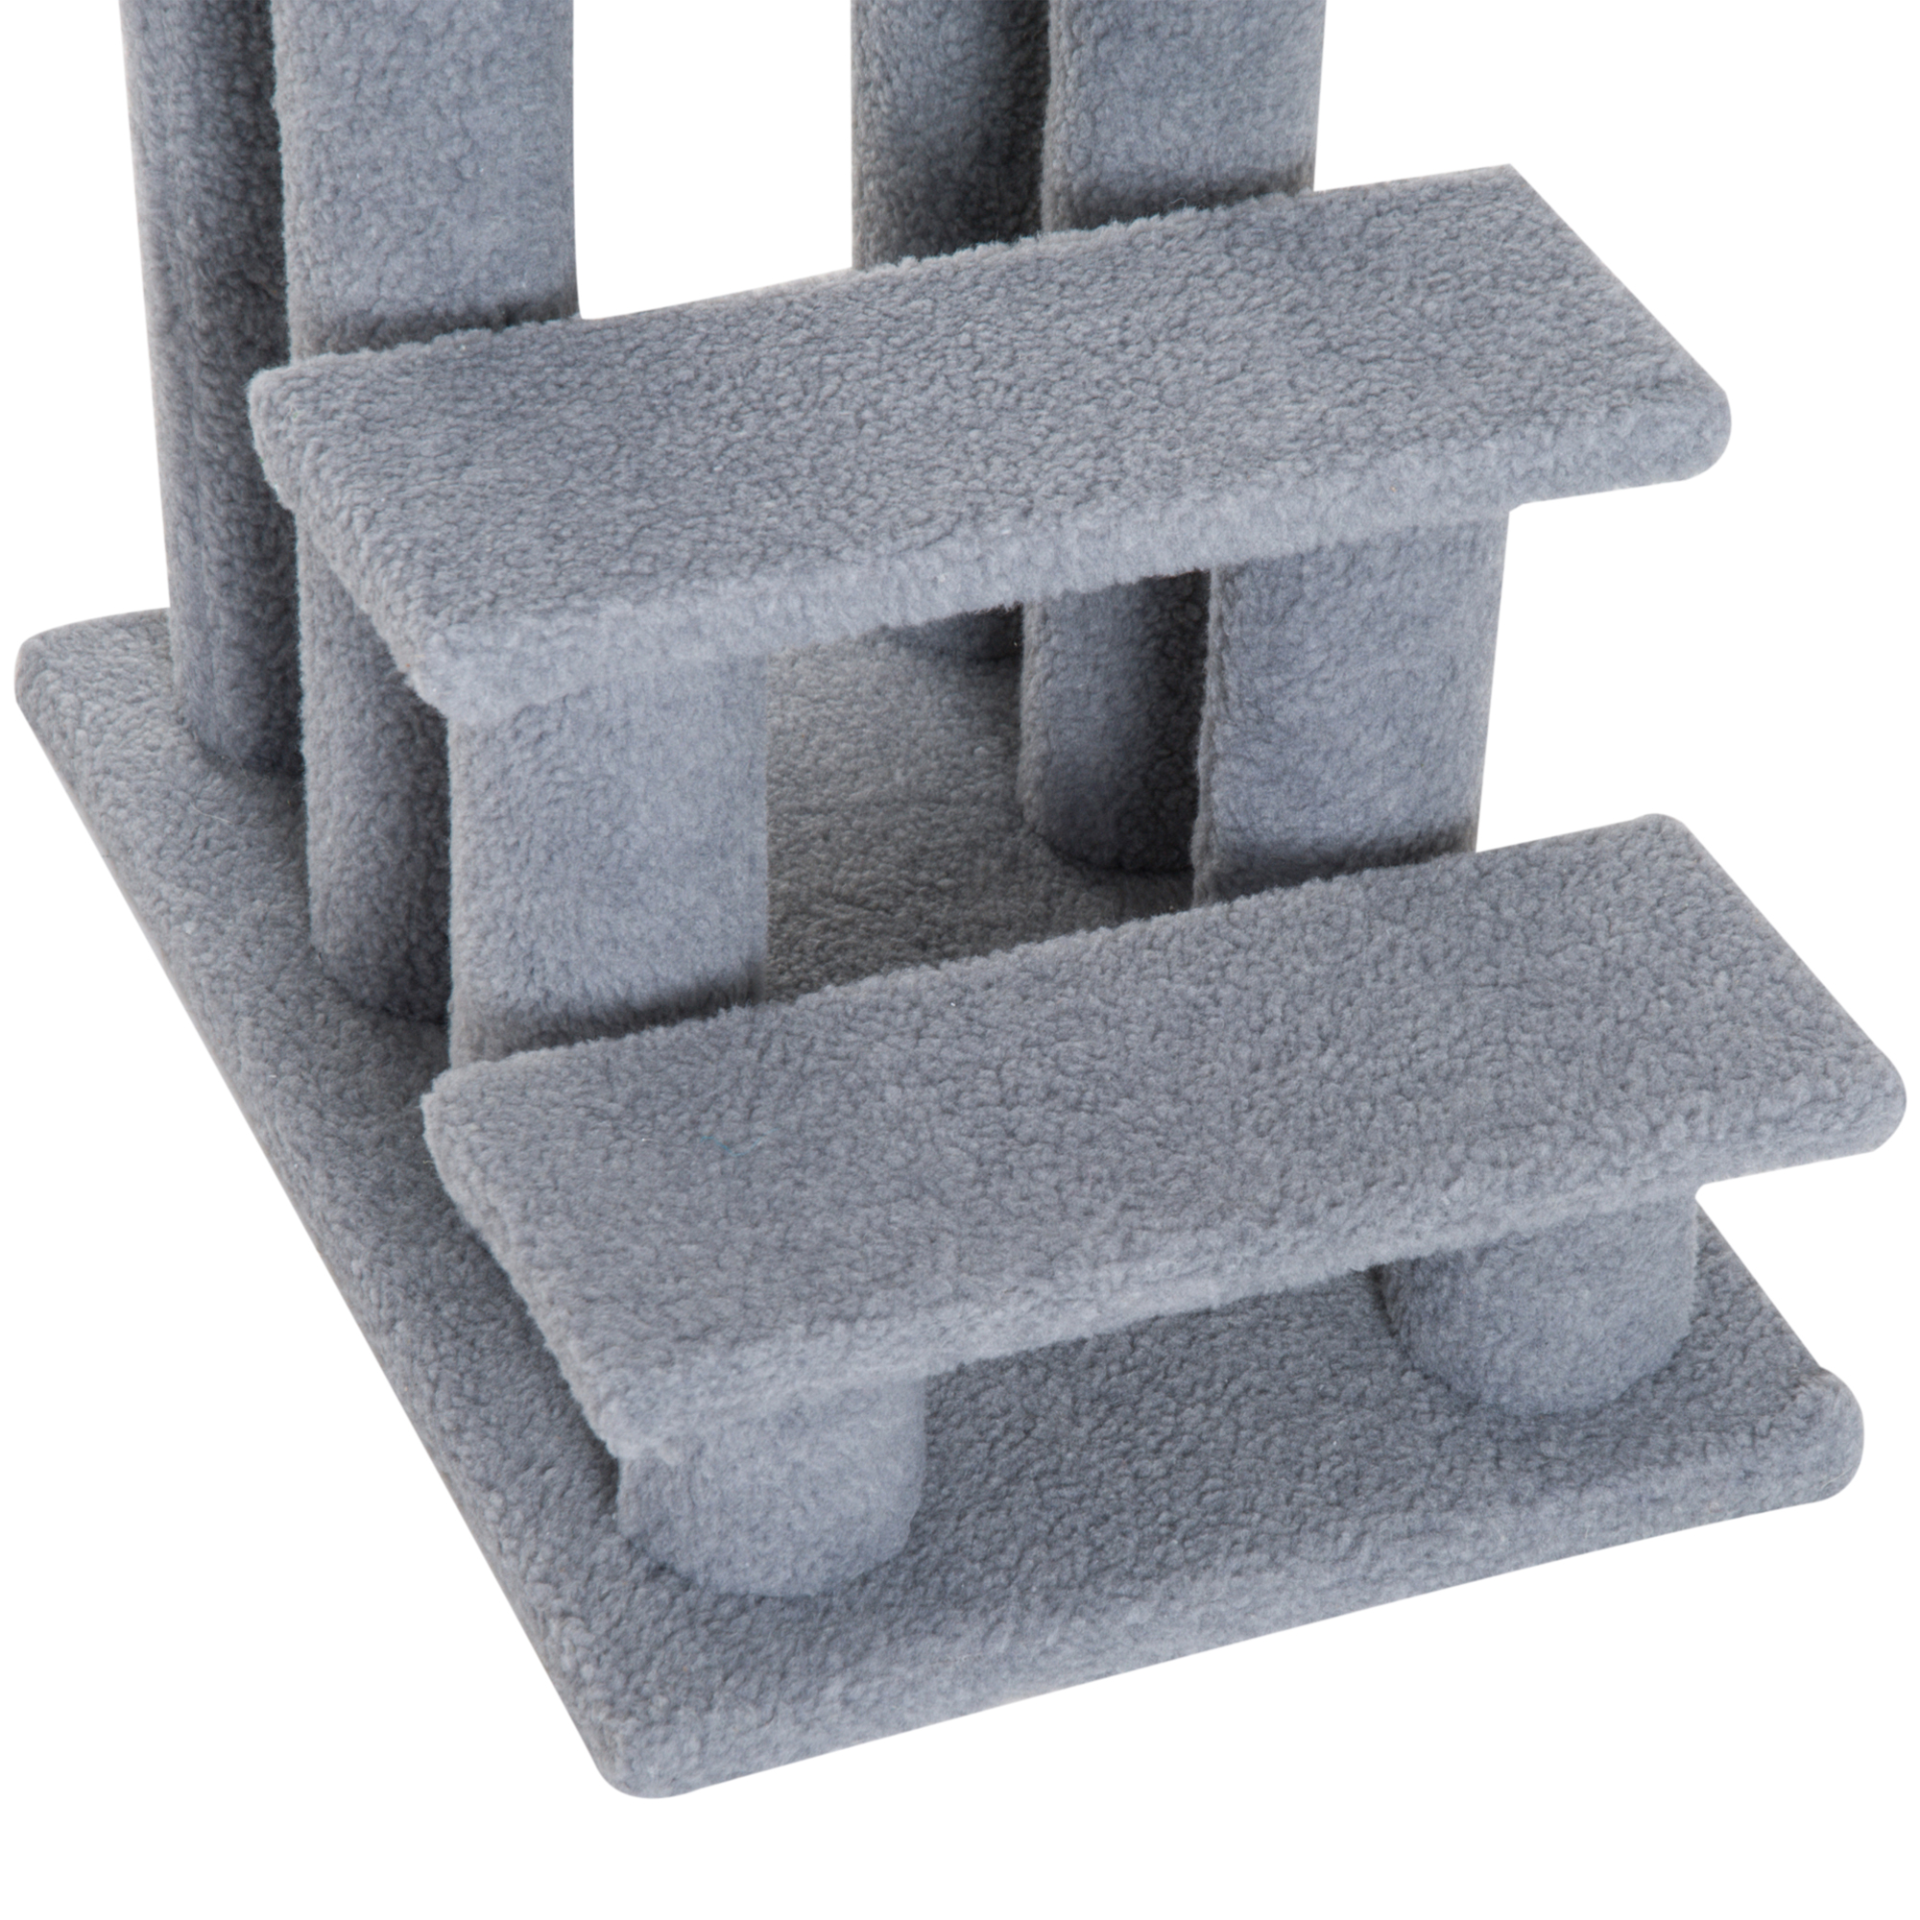 PawHut Dog Steps for Bed 4 Step Pet Stairs for Sofa Dog Cat Climb Ladder 63x43x60 cm Grey